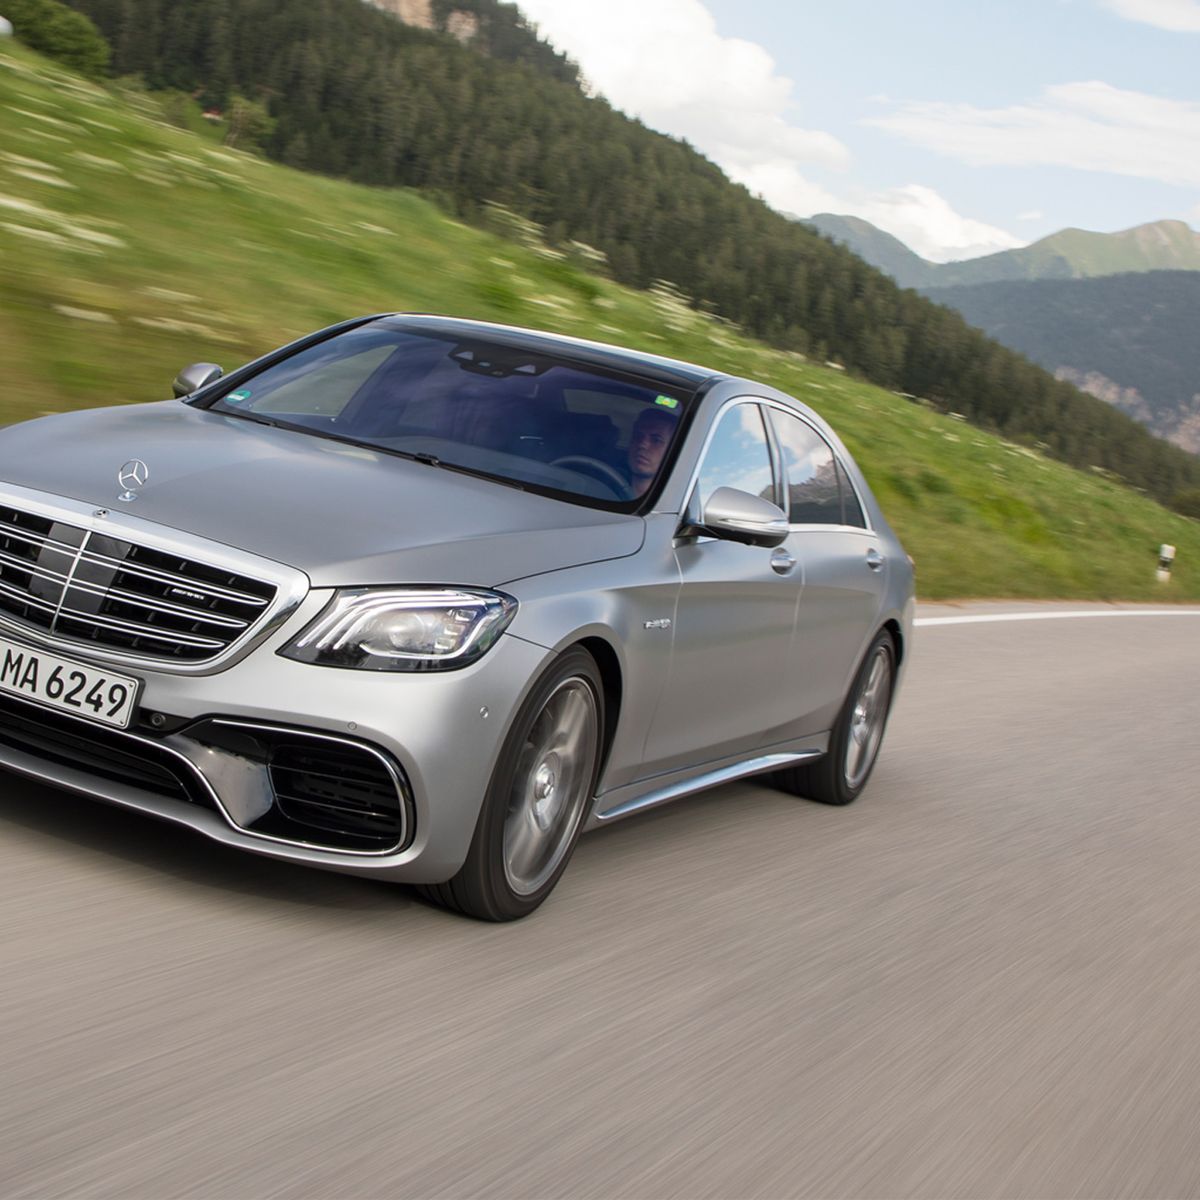 First ride: 2020 Mercedes-Benz S-Class prototype